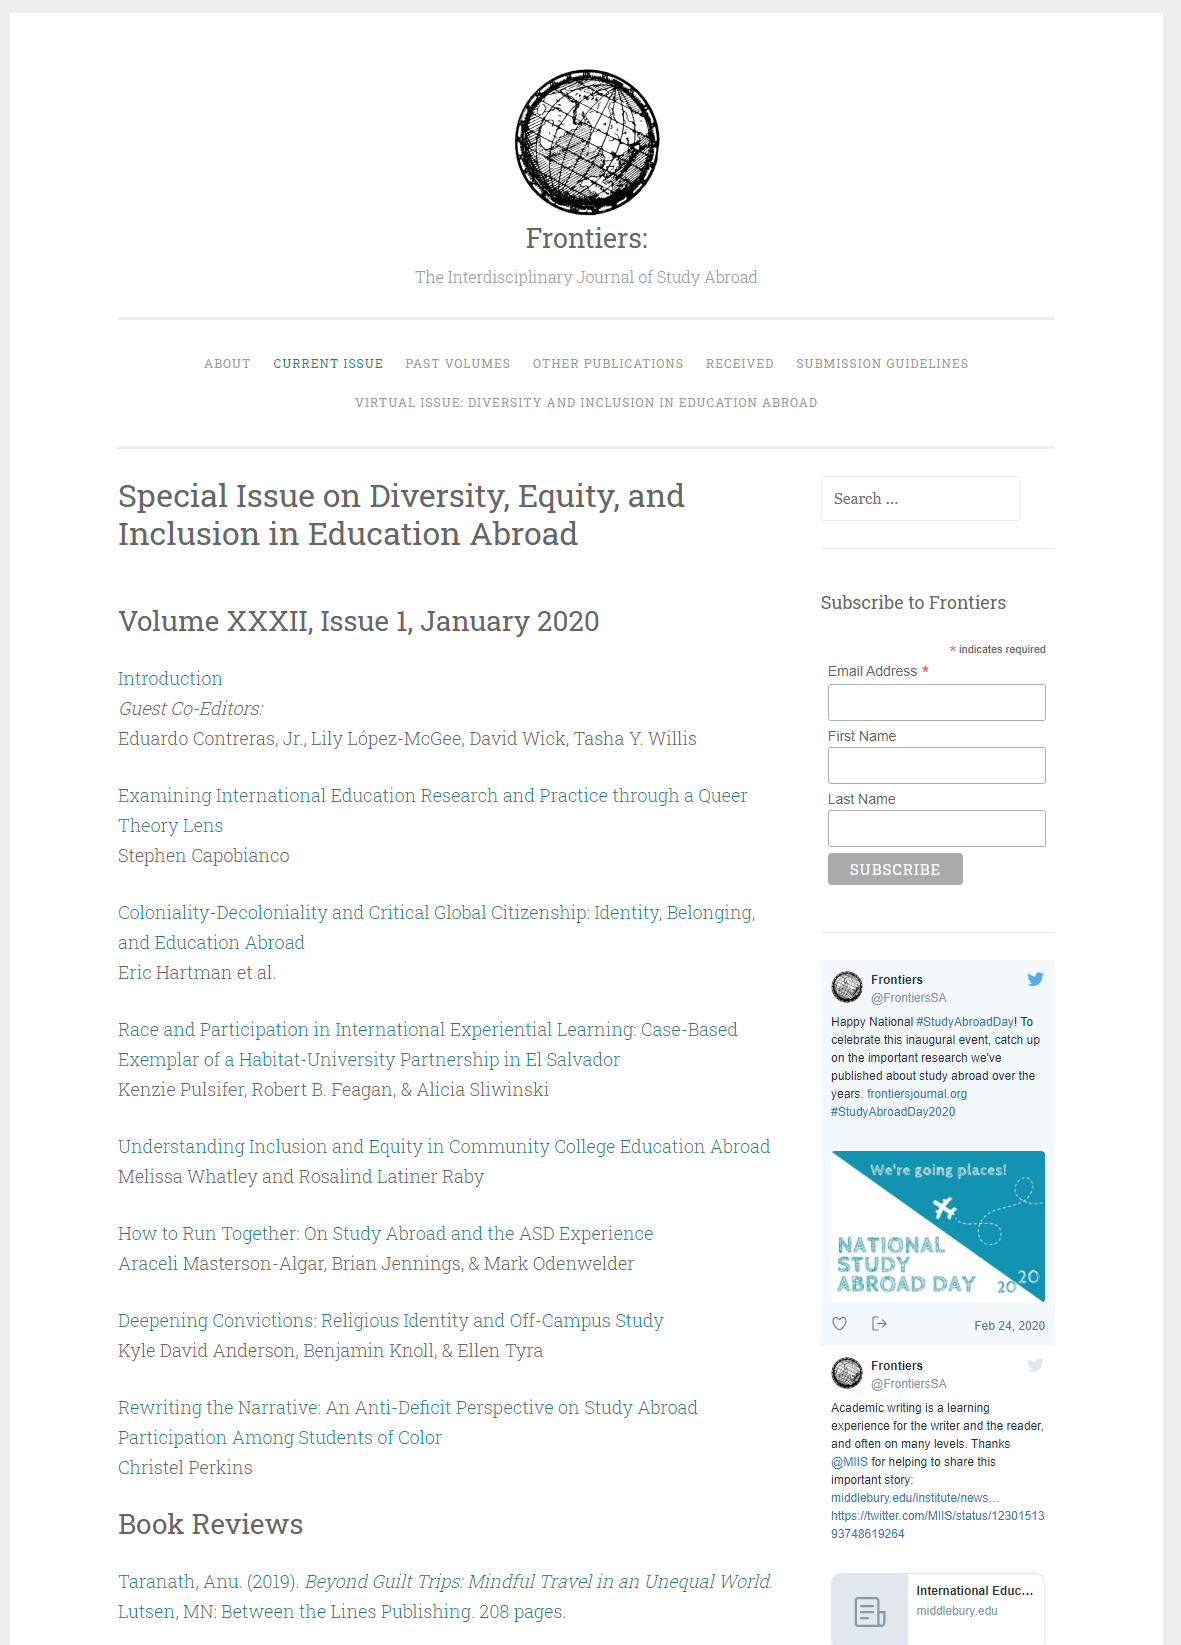 screenshot of original web publication of Special Issue on Diversity, Equity, and Inclusion in Education Abroad